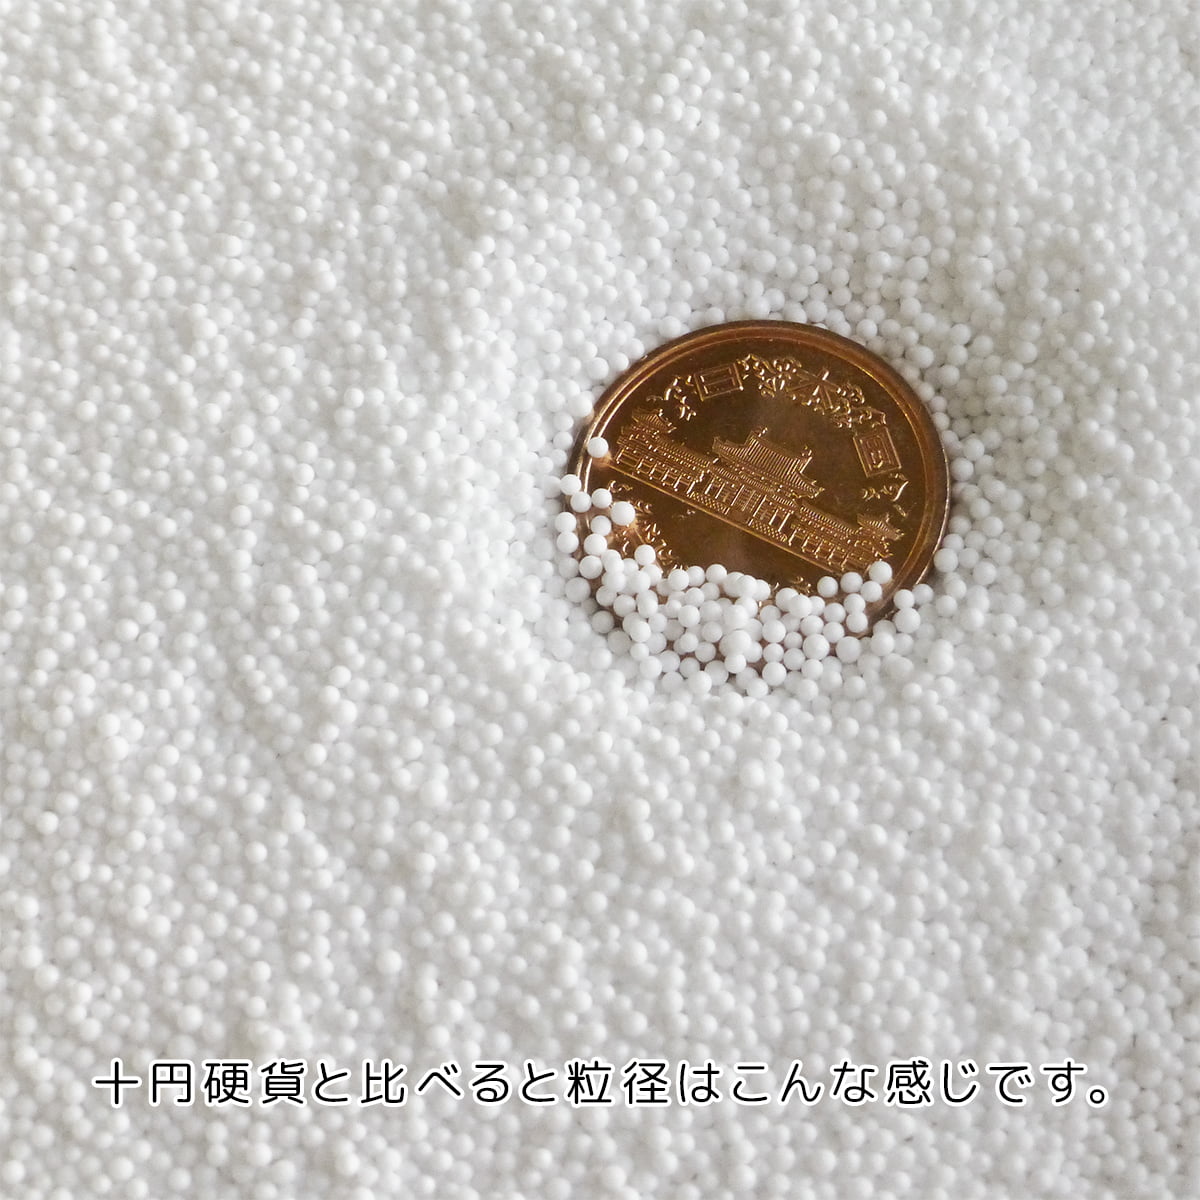  supplement for beads bead diameter 1mm rom and rear (before and after) 1kg made in Japan filling for micro beads cushion beads sofa foamed Police chi Len 